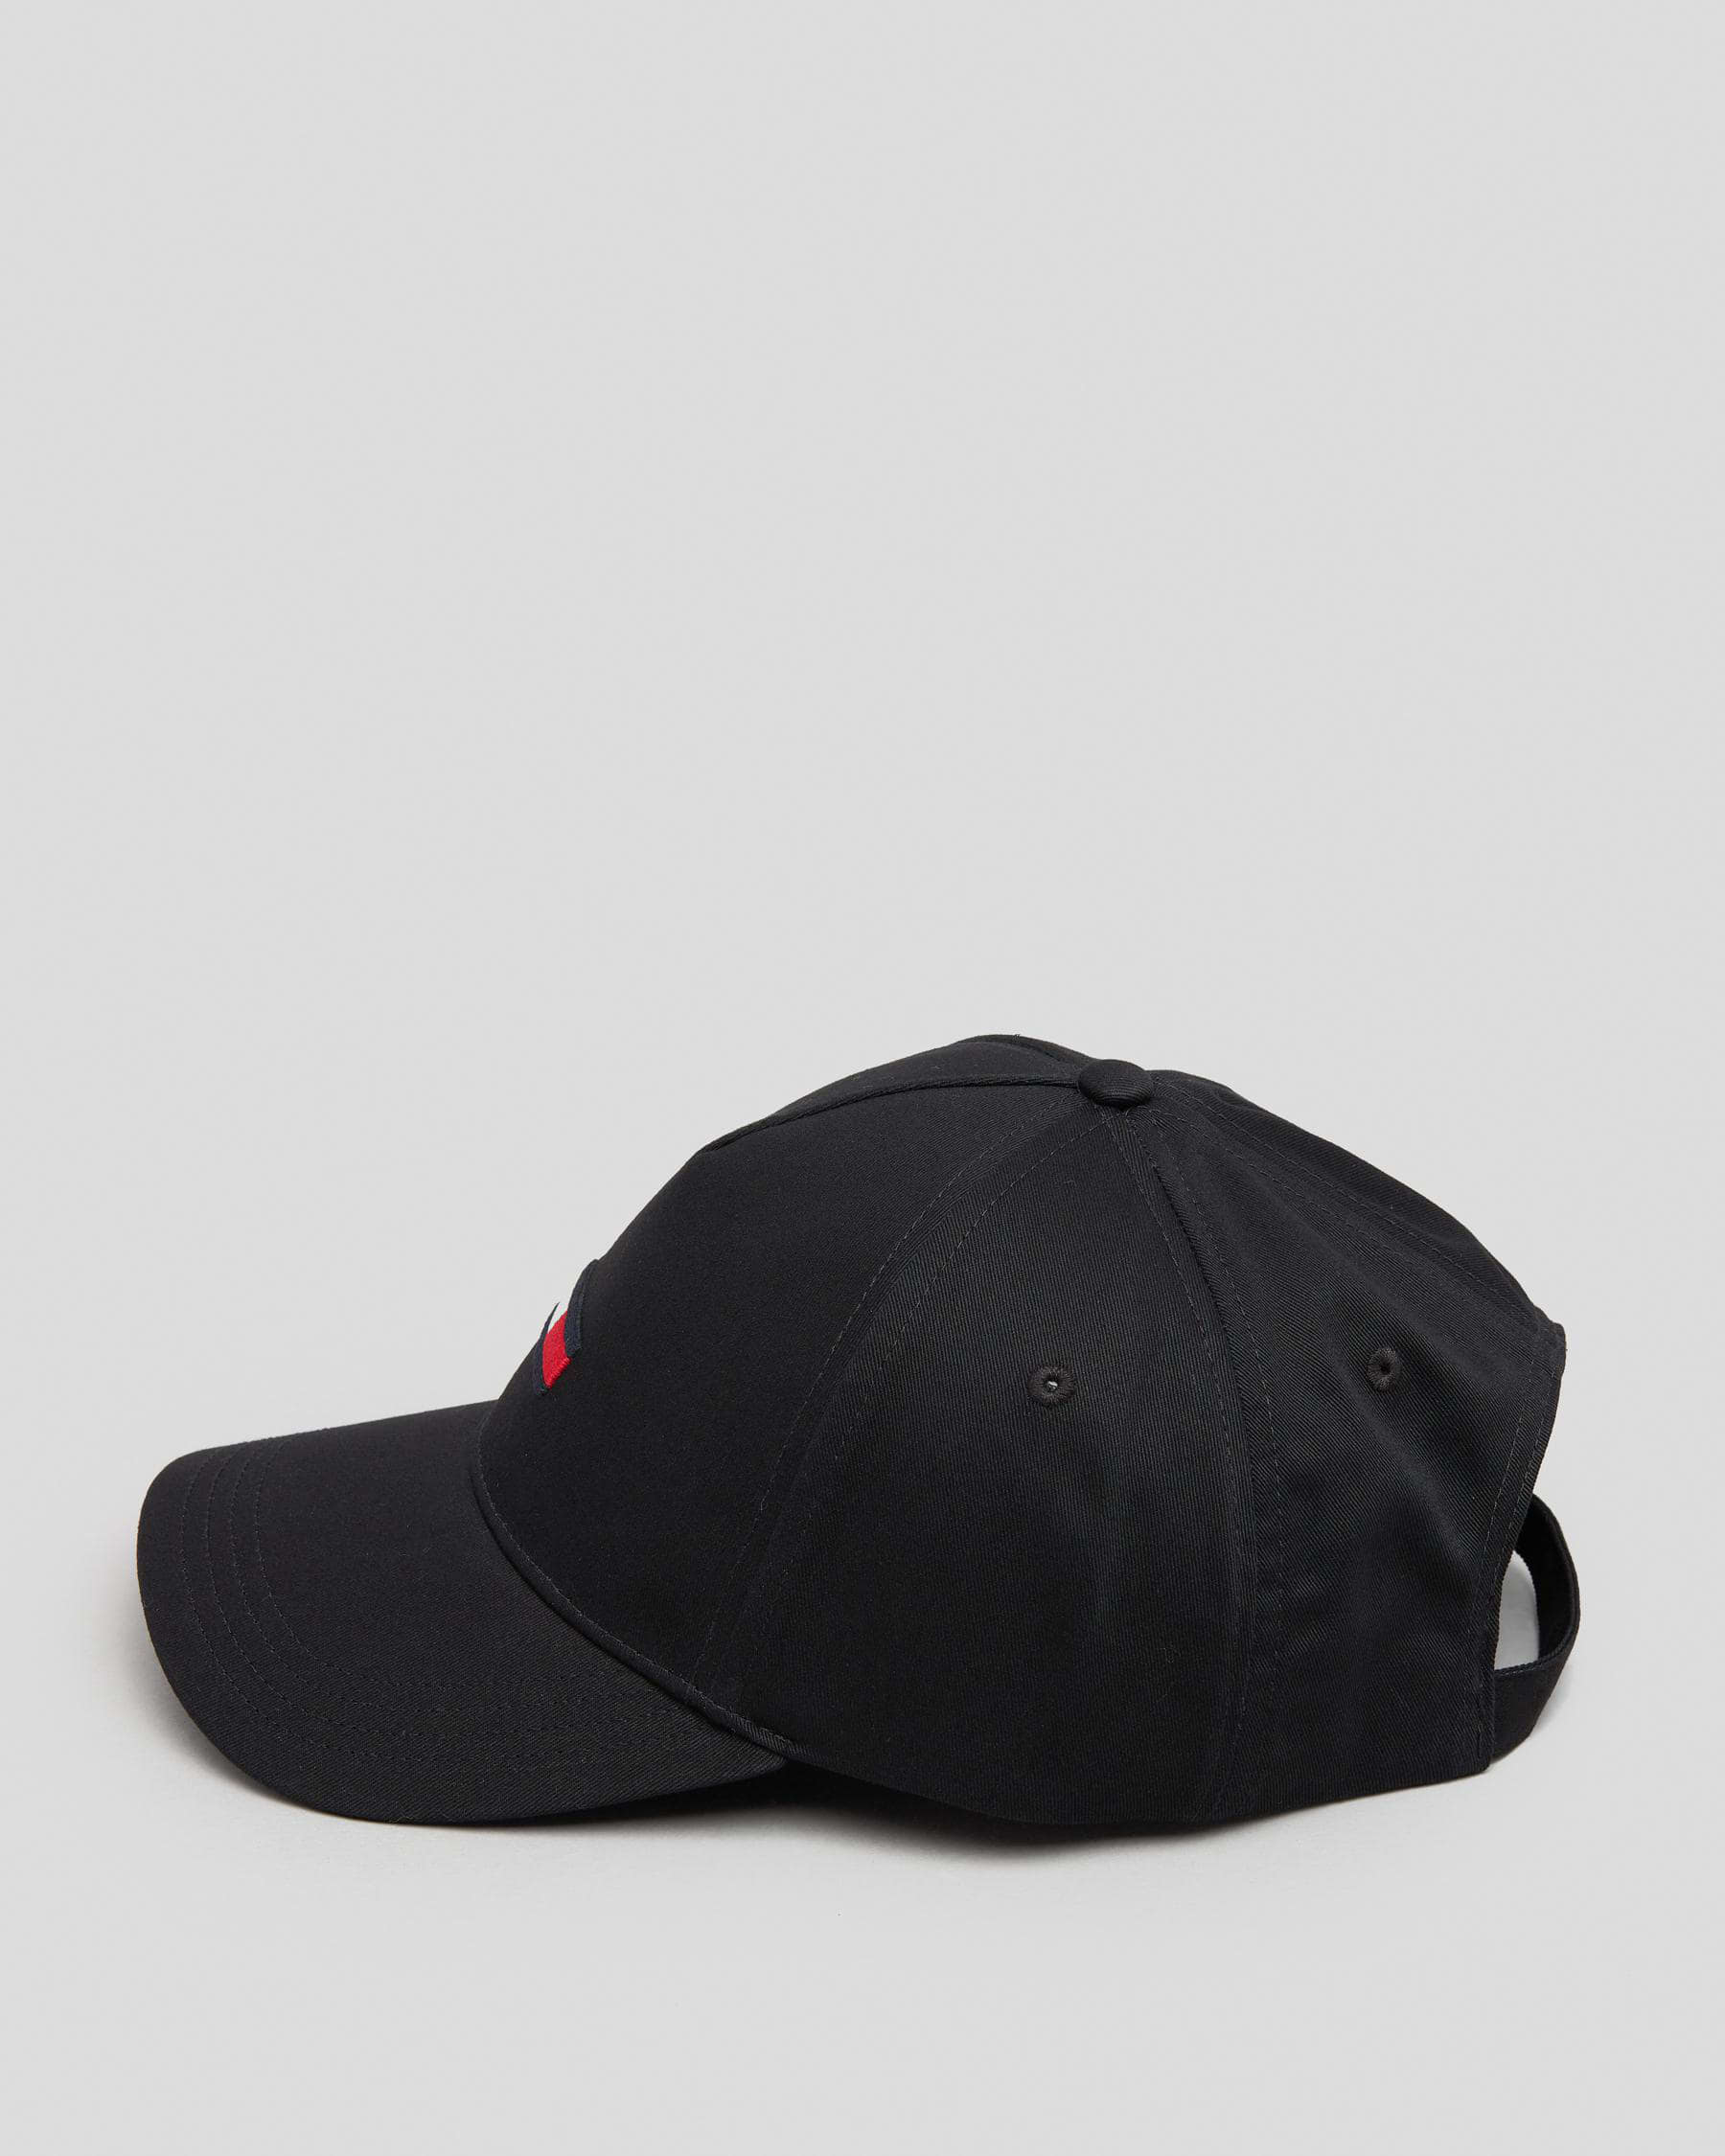 Tommy Hilfiger TJM Flag Easy - States & Returns United In Beach Shipping - City Black FREE* Cap